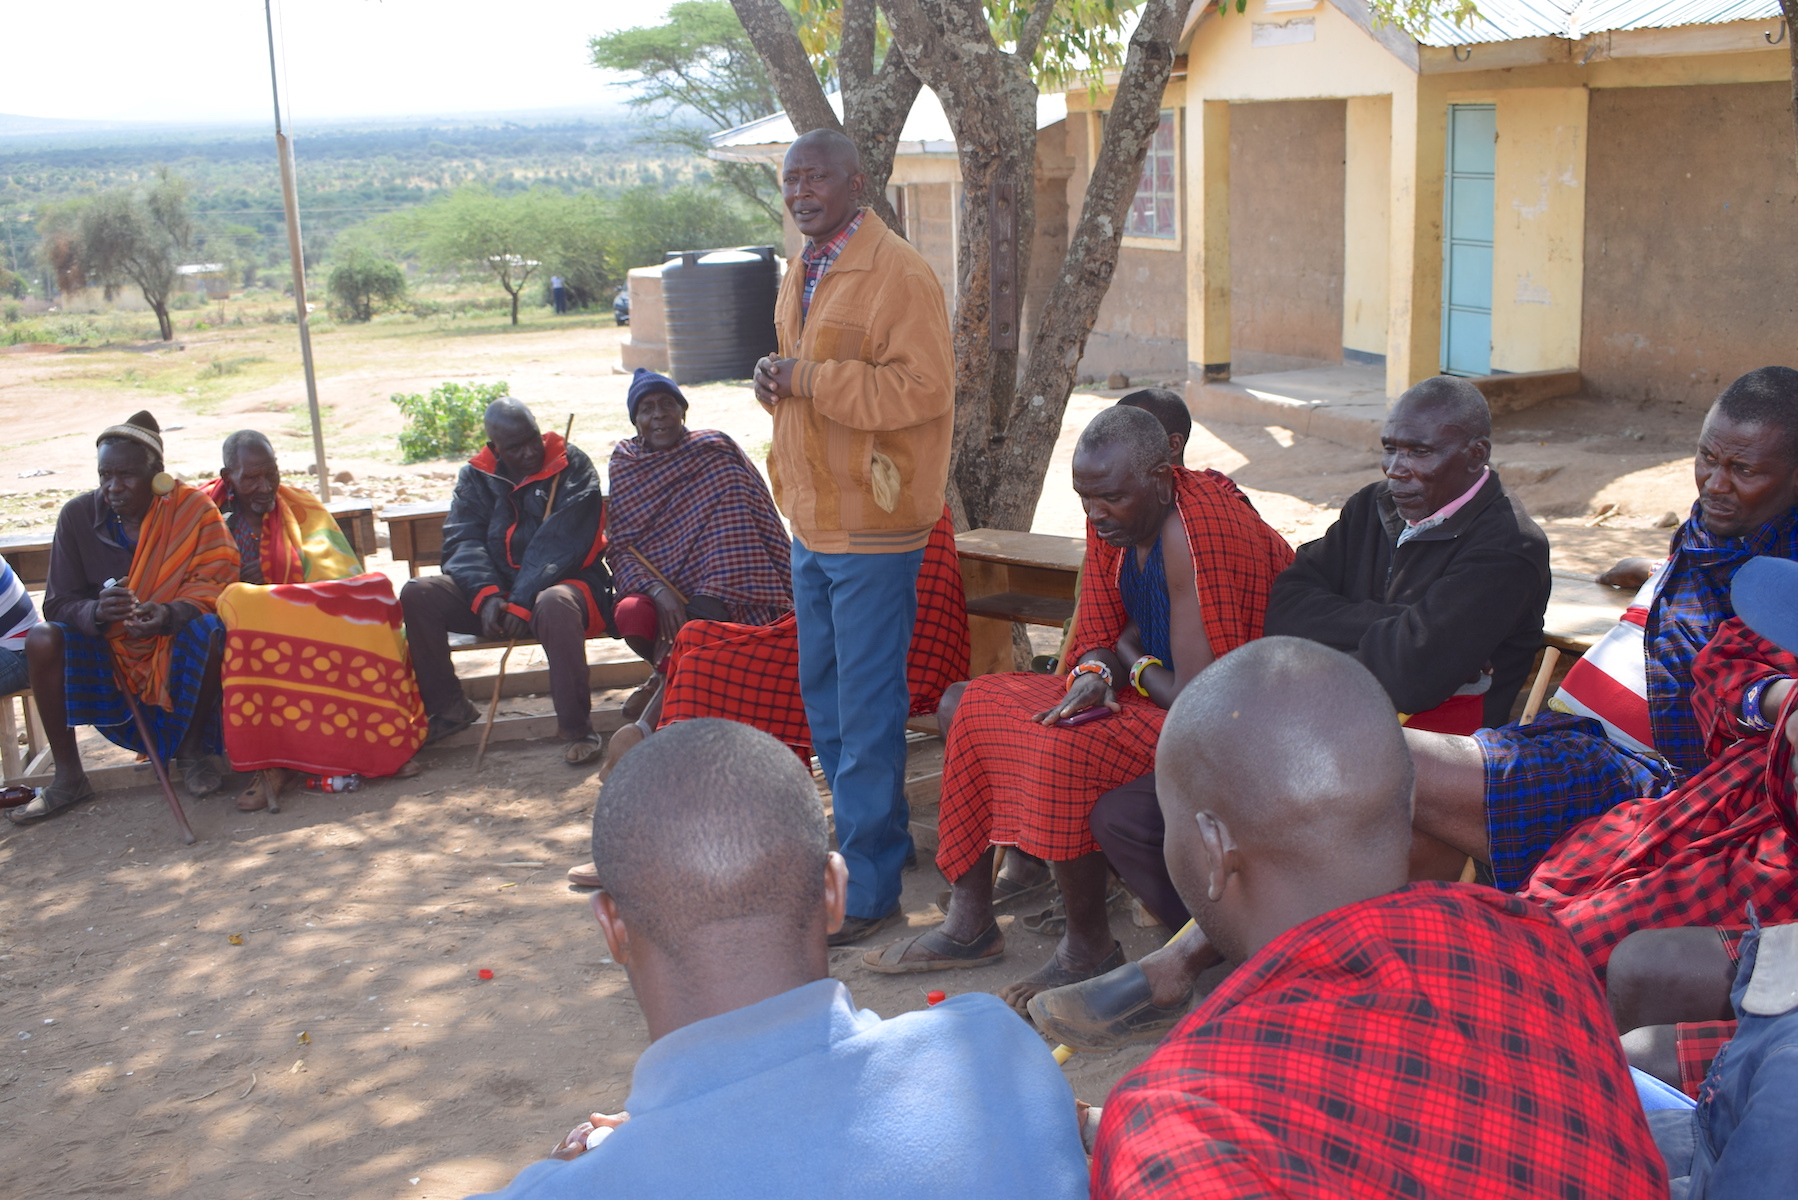 Men dialogue forums, supported by World Vision and UNICEF Kenya are accelerating the abandonment of FGM and child marriage in Kajiado County, Kenya. ©World Vision Photo/Kenya.